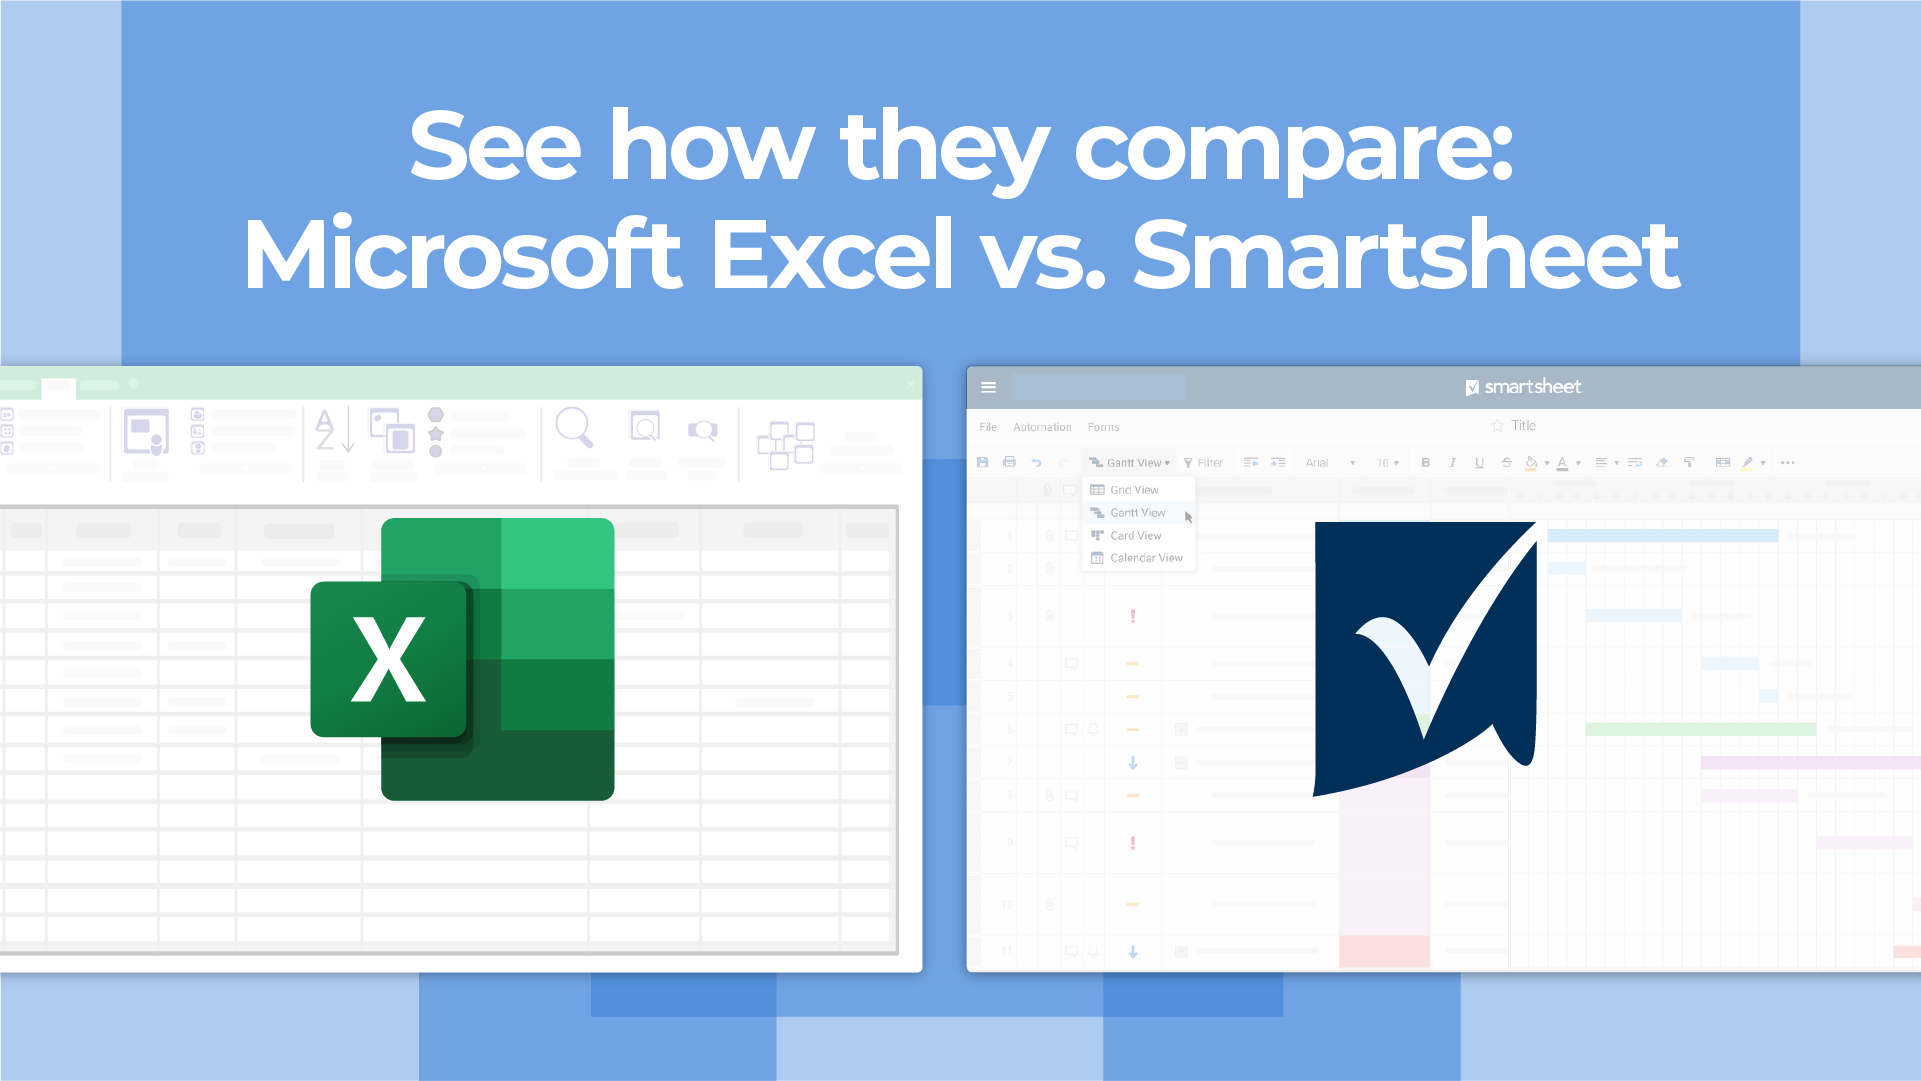 download data analysis for excel online